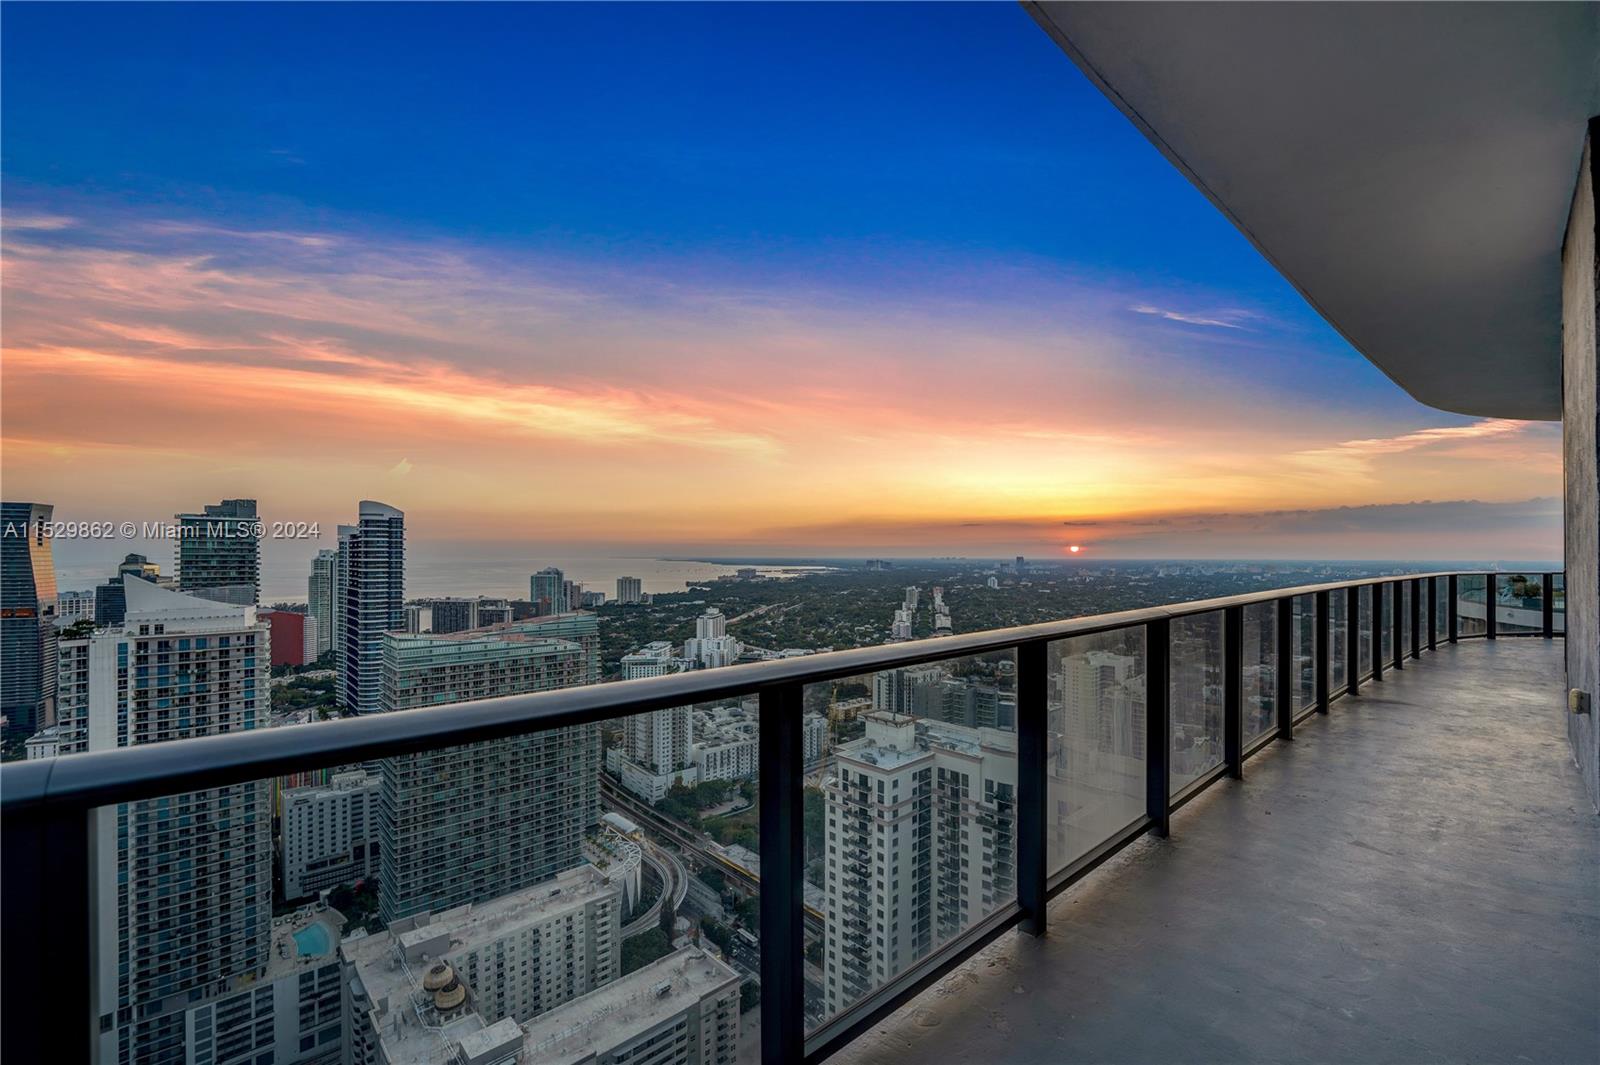 Penthouse in the pinnacle of luxury living in the heart of Miami's vibrant Brickell neighborhood. Featuring 4 bed /4.5 bath and 3 parking's assigned(owned). Brickell Heights was designed by David Rockwell with contemporary designs, this residence is a true gem in the city skyline. Step inside and immerse yourself in the soaring ceilings, and expansive impact windows that flood the space with natural light. The open-concept living area blends with the gourmet kitchen, with top-of-the-line appliances and cabinetry. Unwind on the expansive private balcony, where you can enjoy panoramic views of Miami and the sparkling ocean. Access to all the amenities, such as fitness center, sky pool deck, pool terrace, theater room, spa, 24h concierge. EV Charging available. Unit rented until Nov 2024.